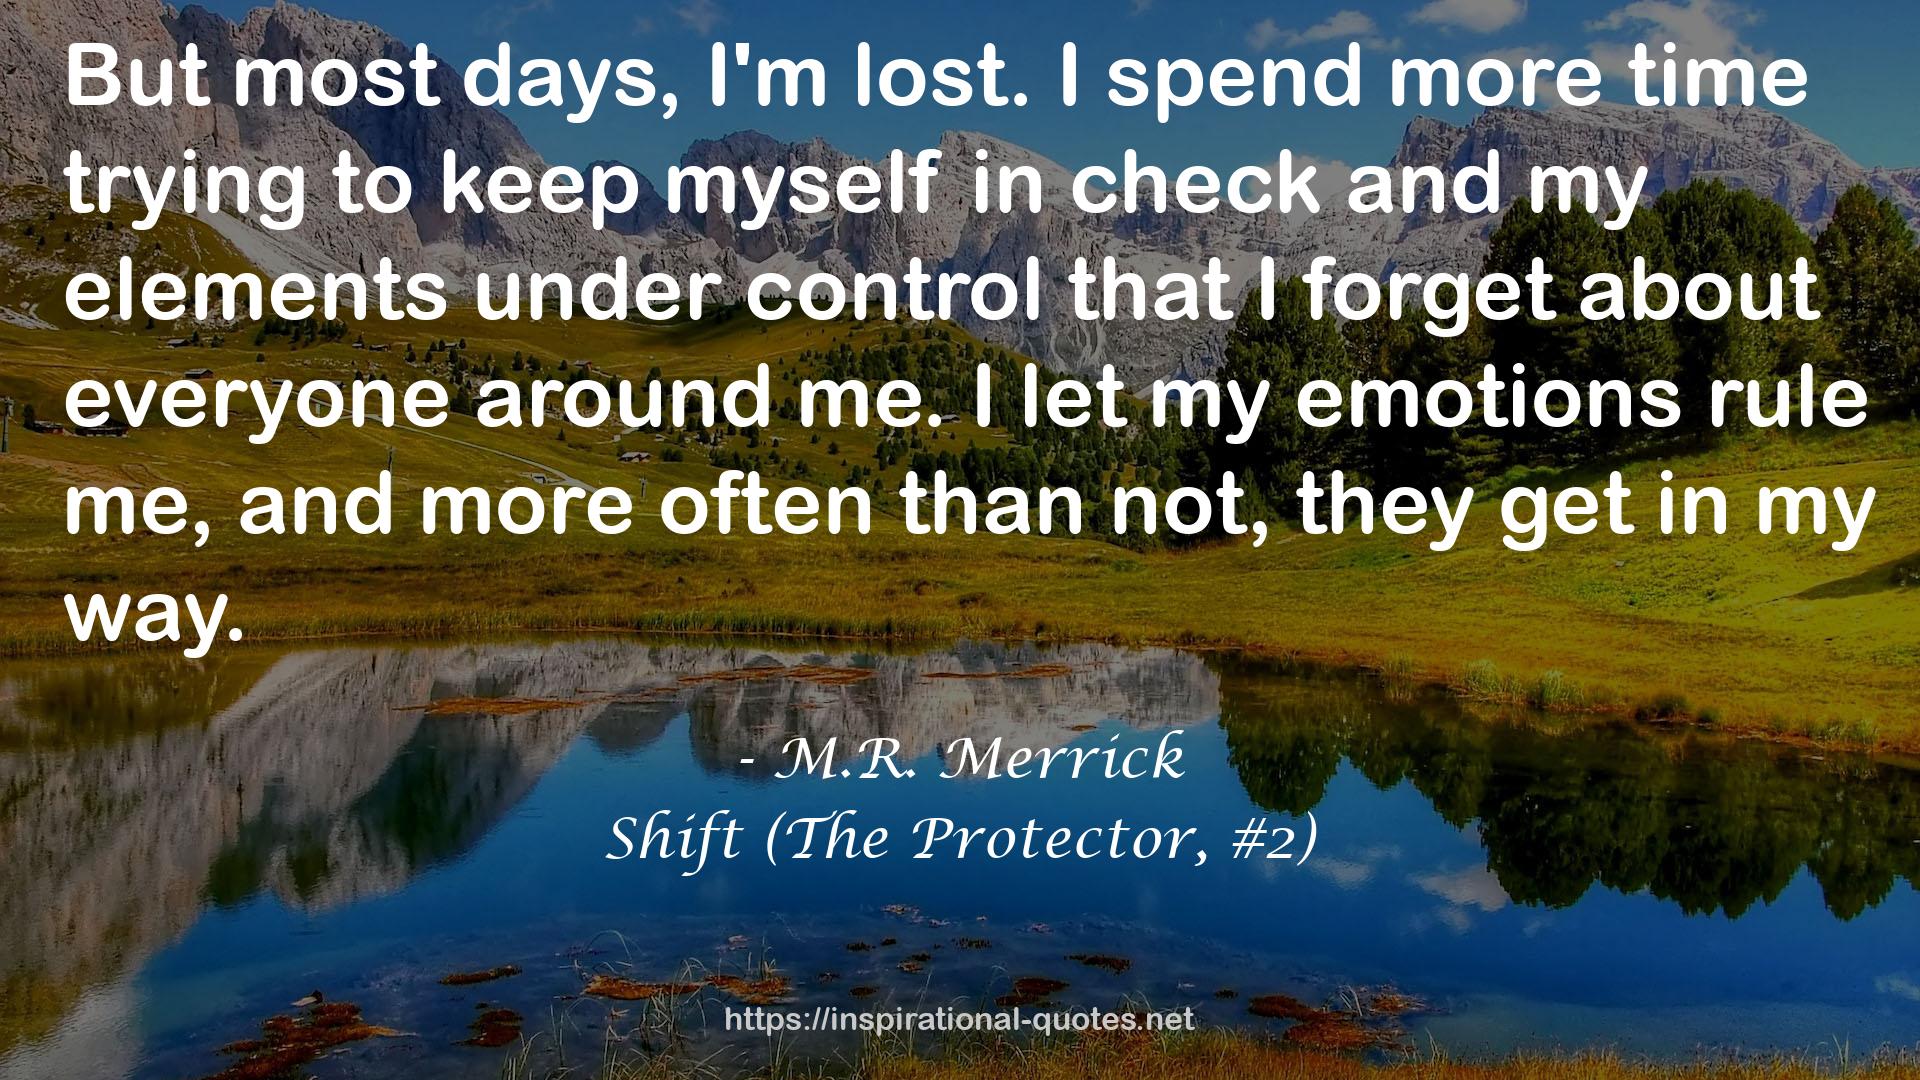 Shift (The Protector, #2) QUOTES